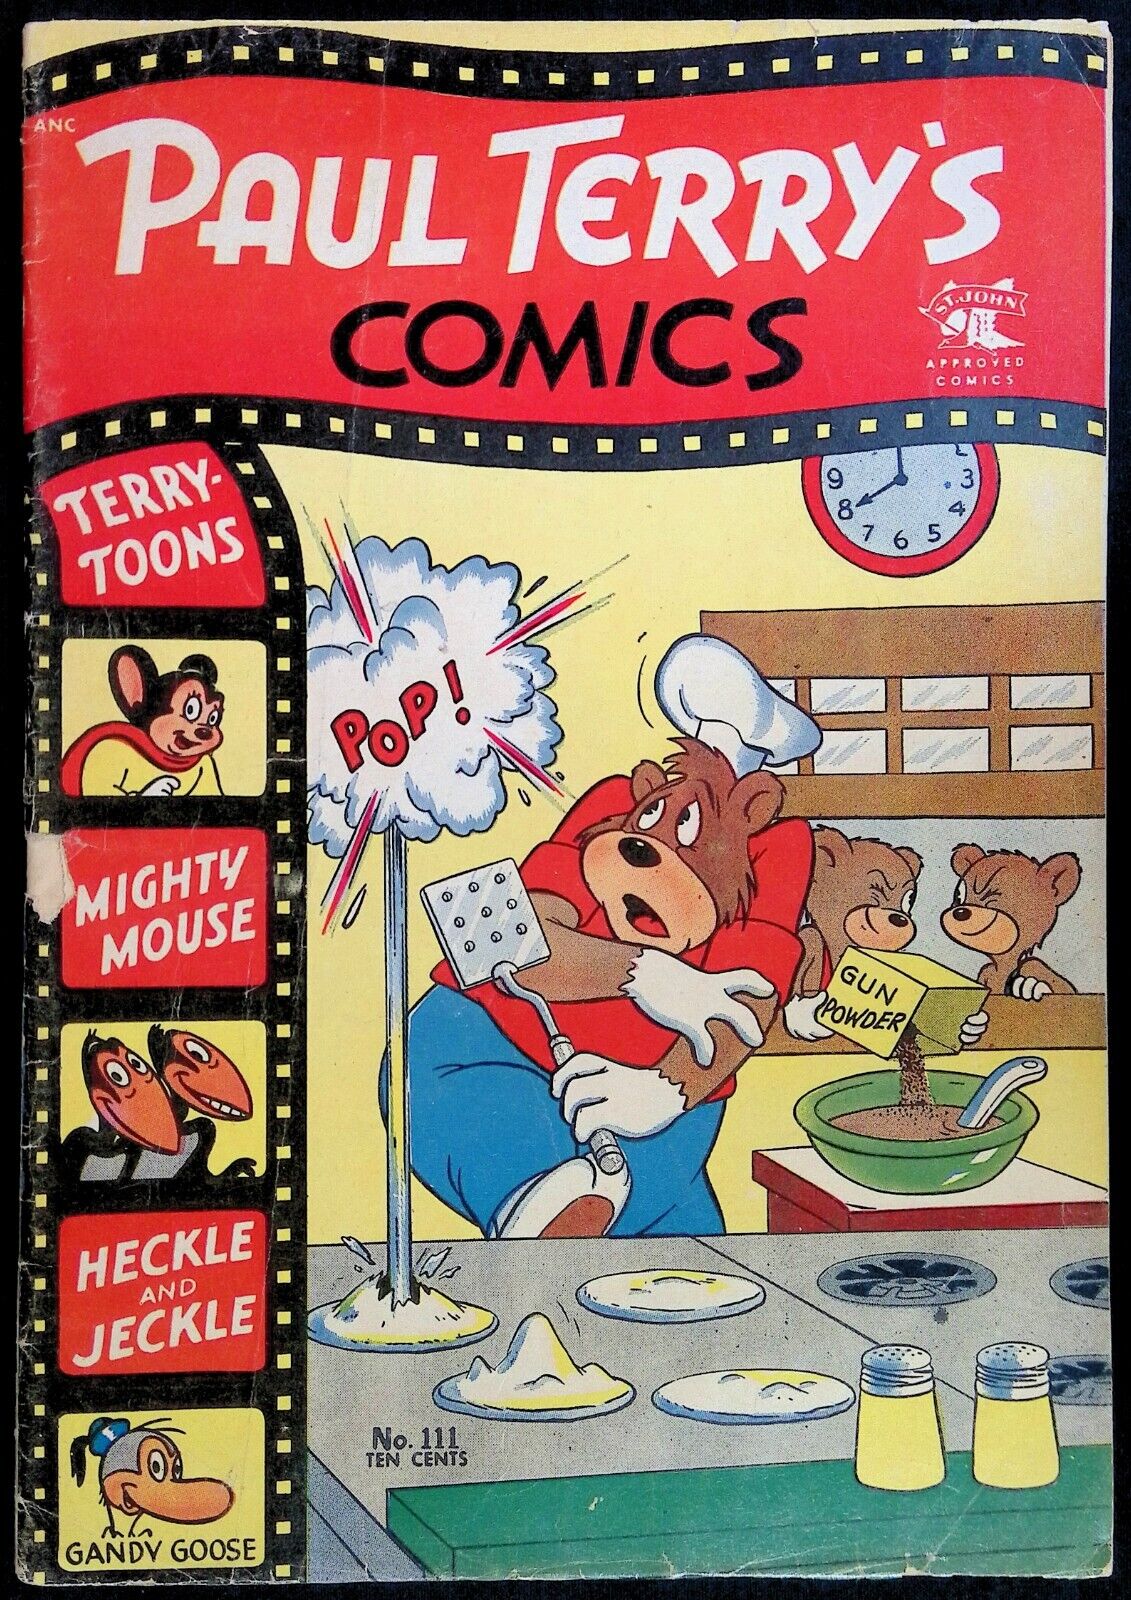 PAUL TERRY'S COMICS #111 ~ GD 1954 ST. JOHN ~ MIGHTY MOUSE, HECKLE AND JECKLE